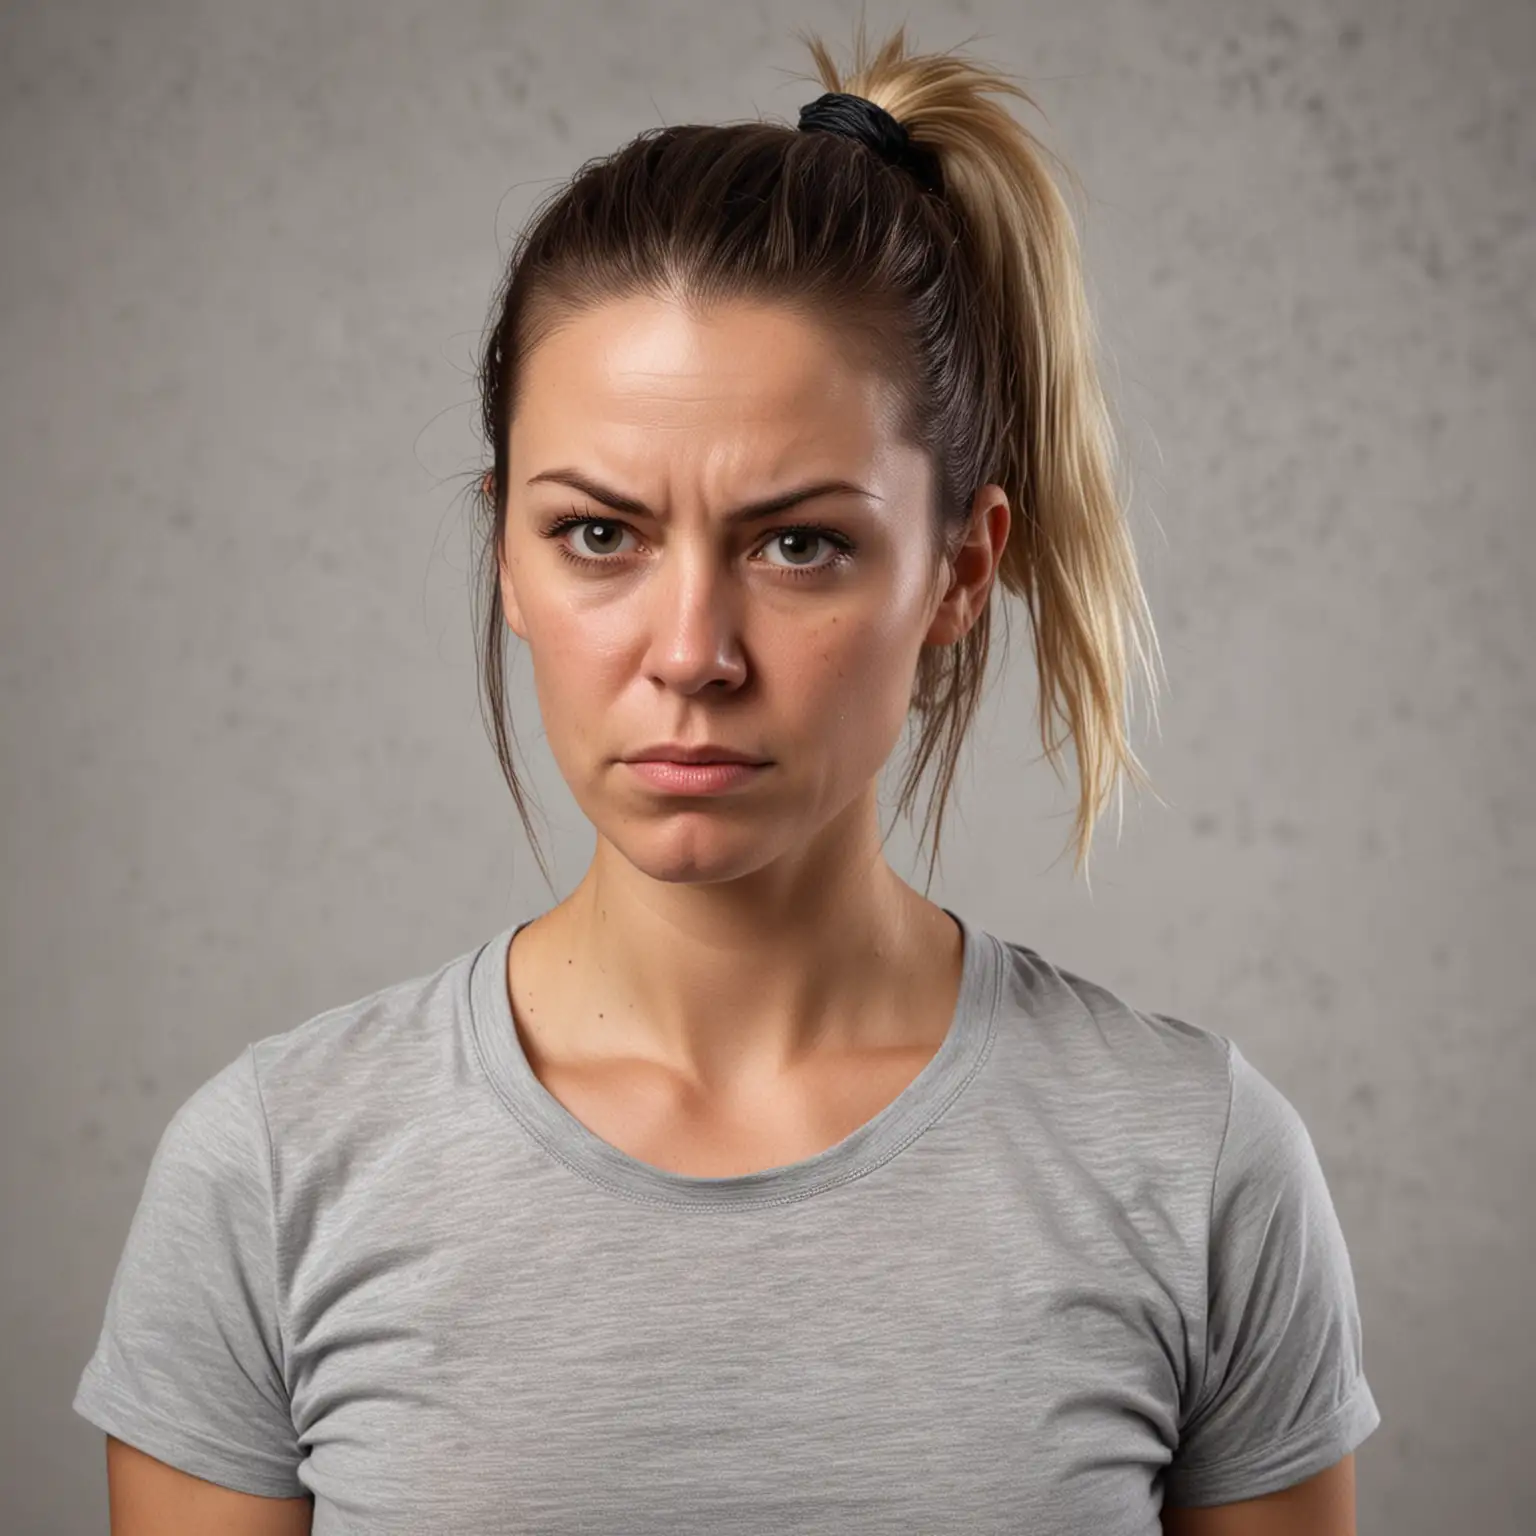 A 35 year old white American women, she has a sallow complexion, oily skin, greasy hair in a low ponytail and she looks angry and lonely. She is wearing a t-shirt